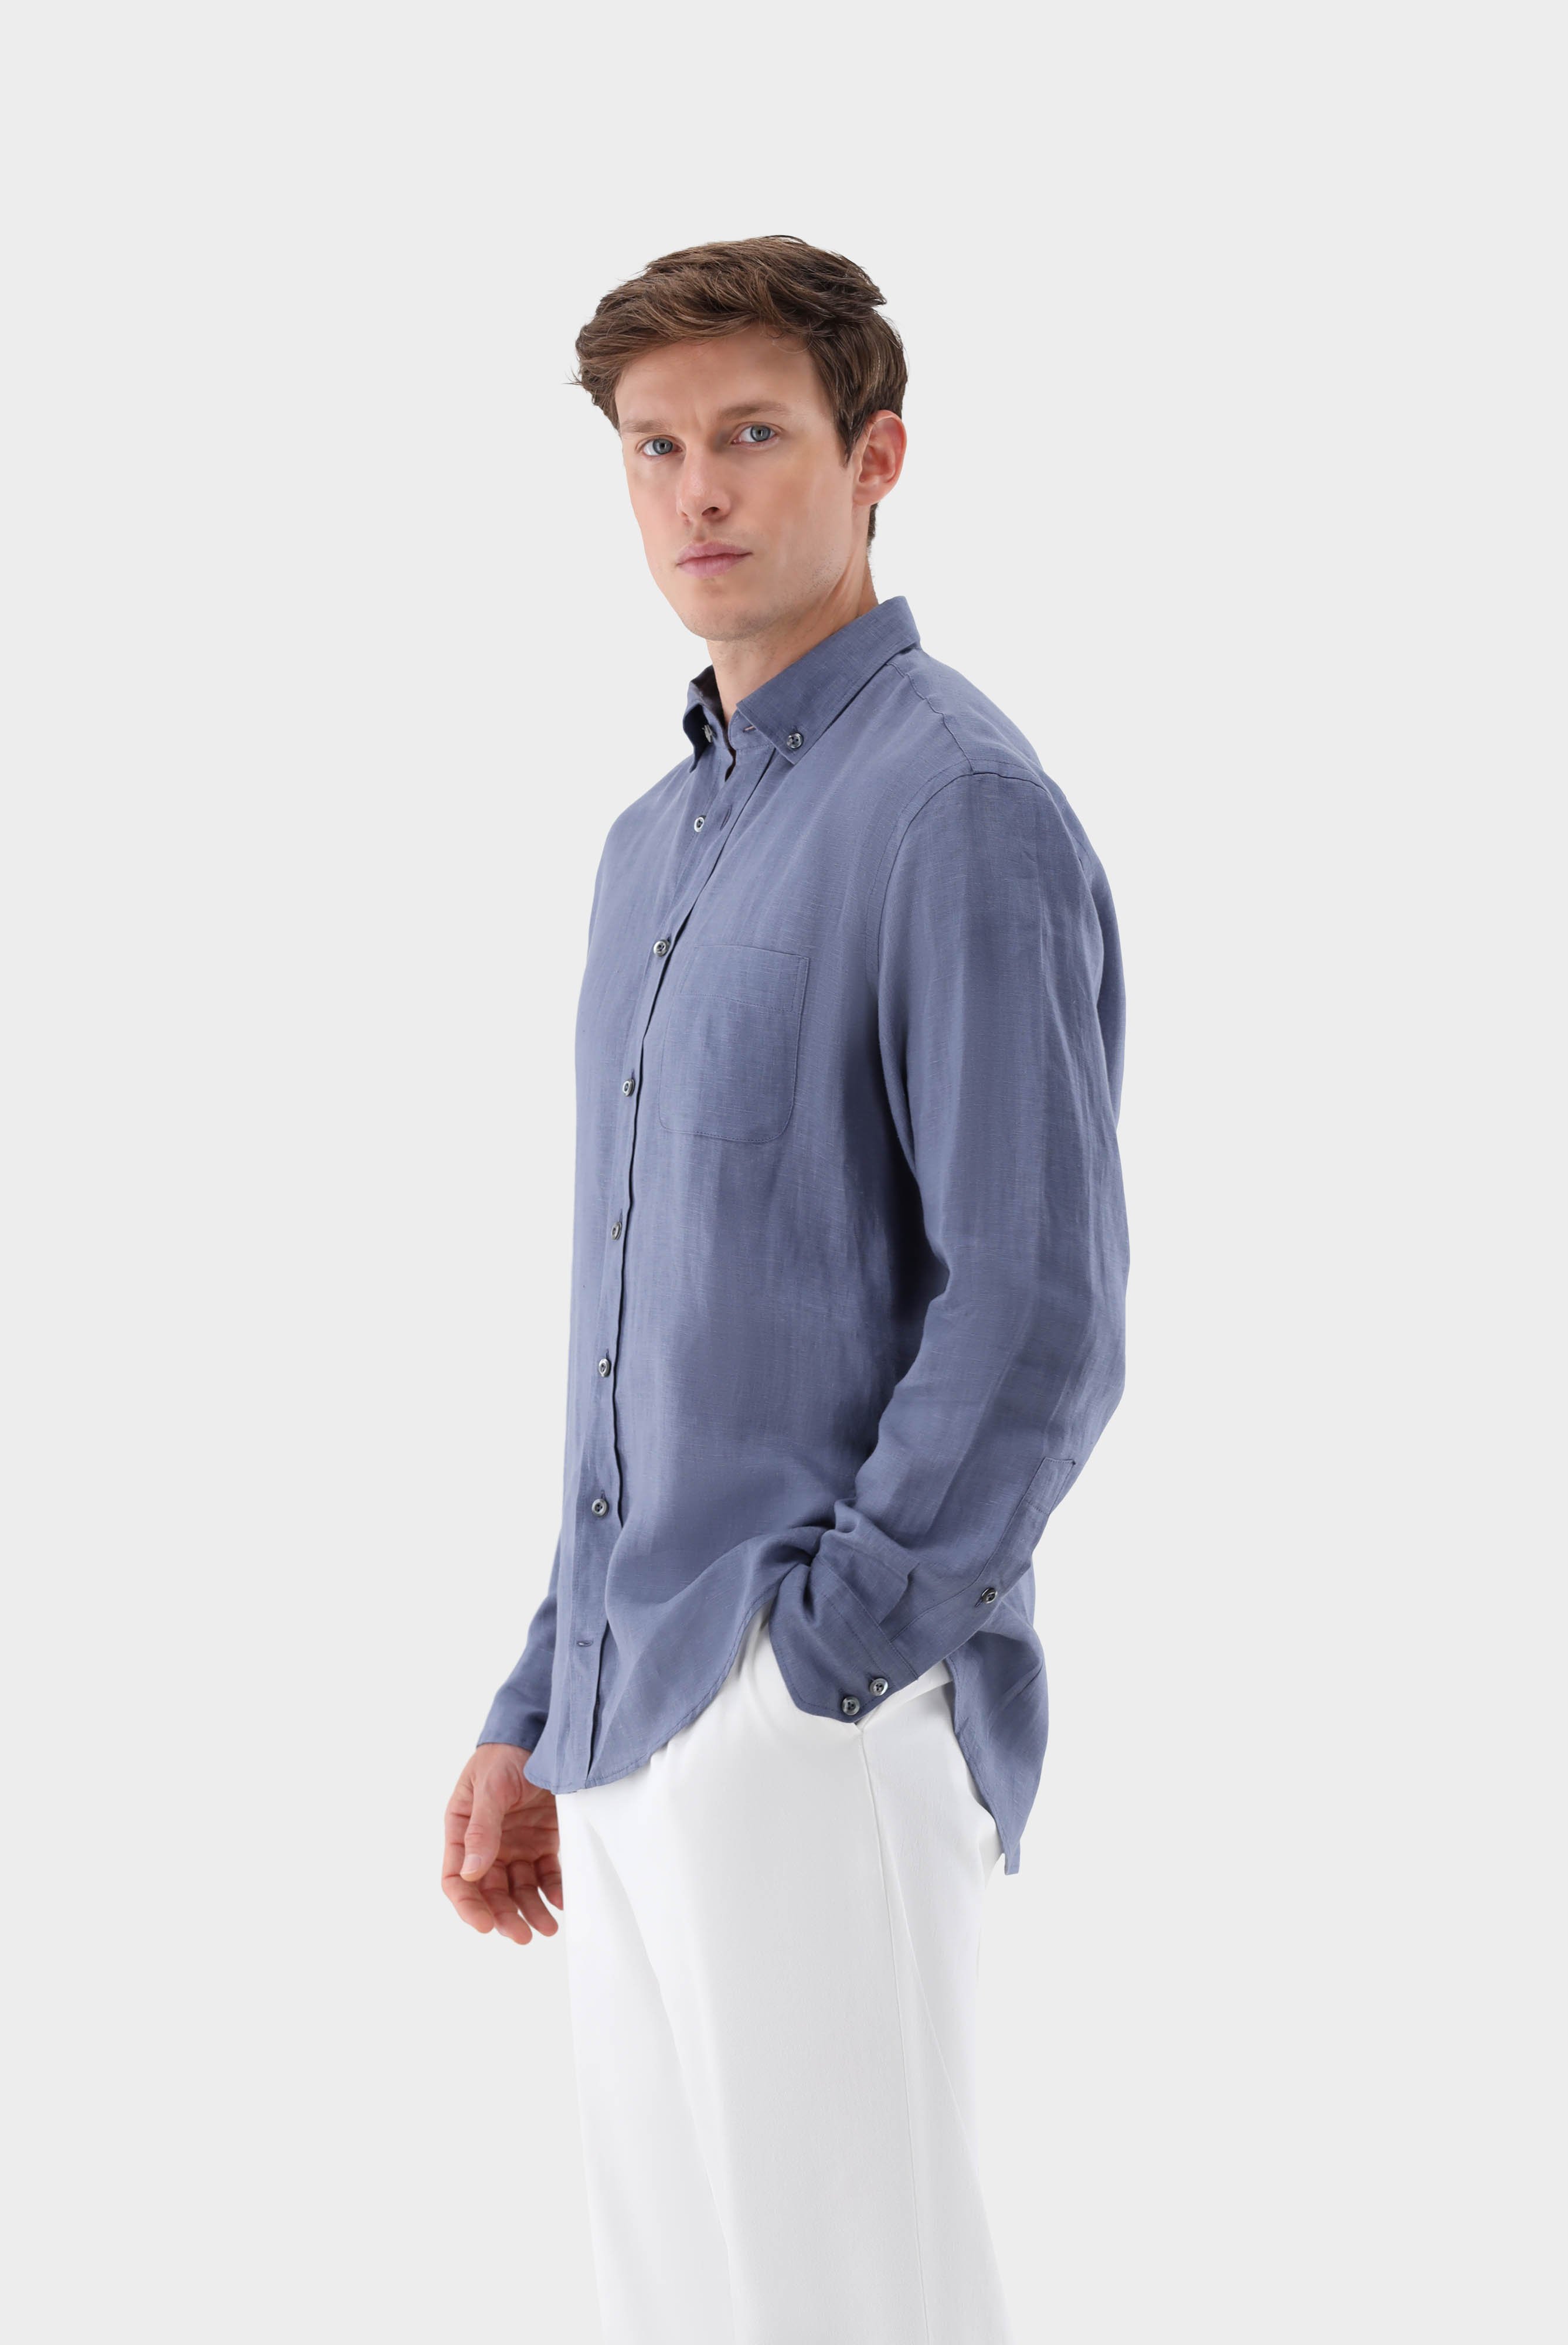 Casual Shirts+Linen Button-Down Collar Shirt Tailor Fit+20.2013.9V.150555.680.41